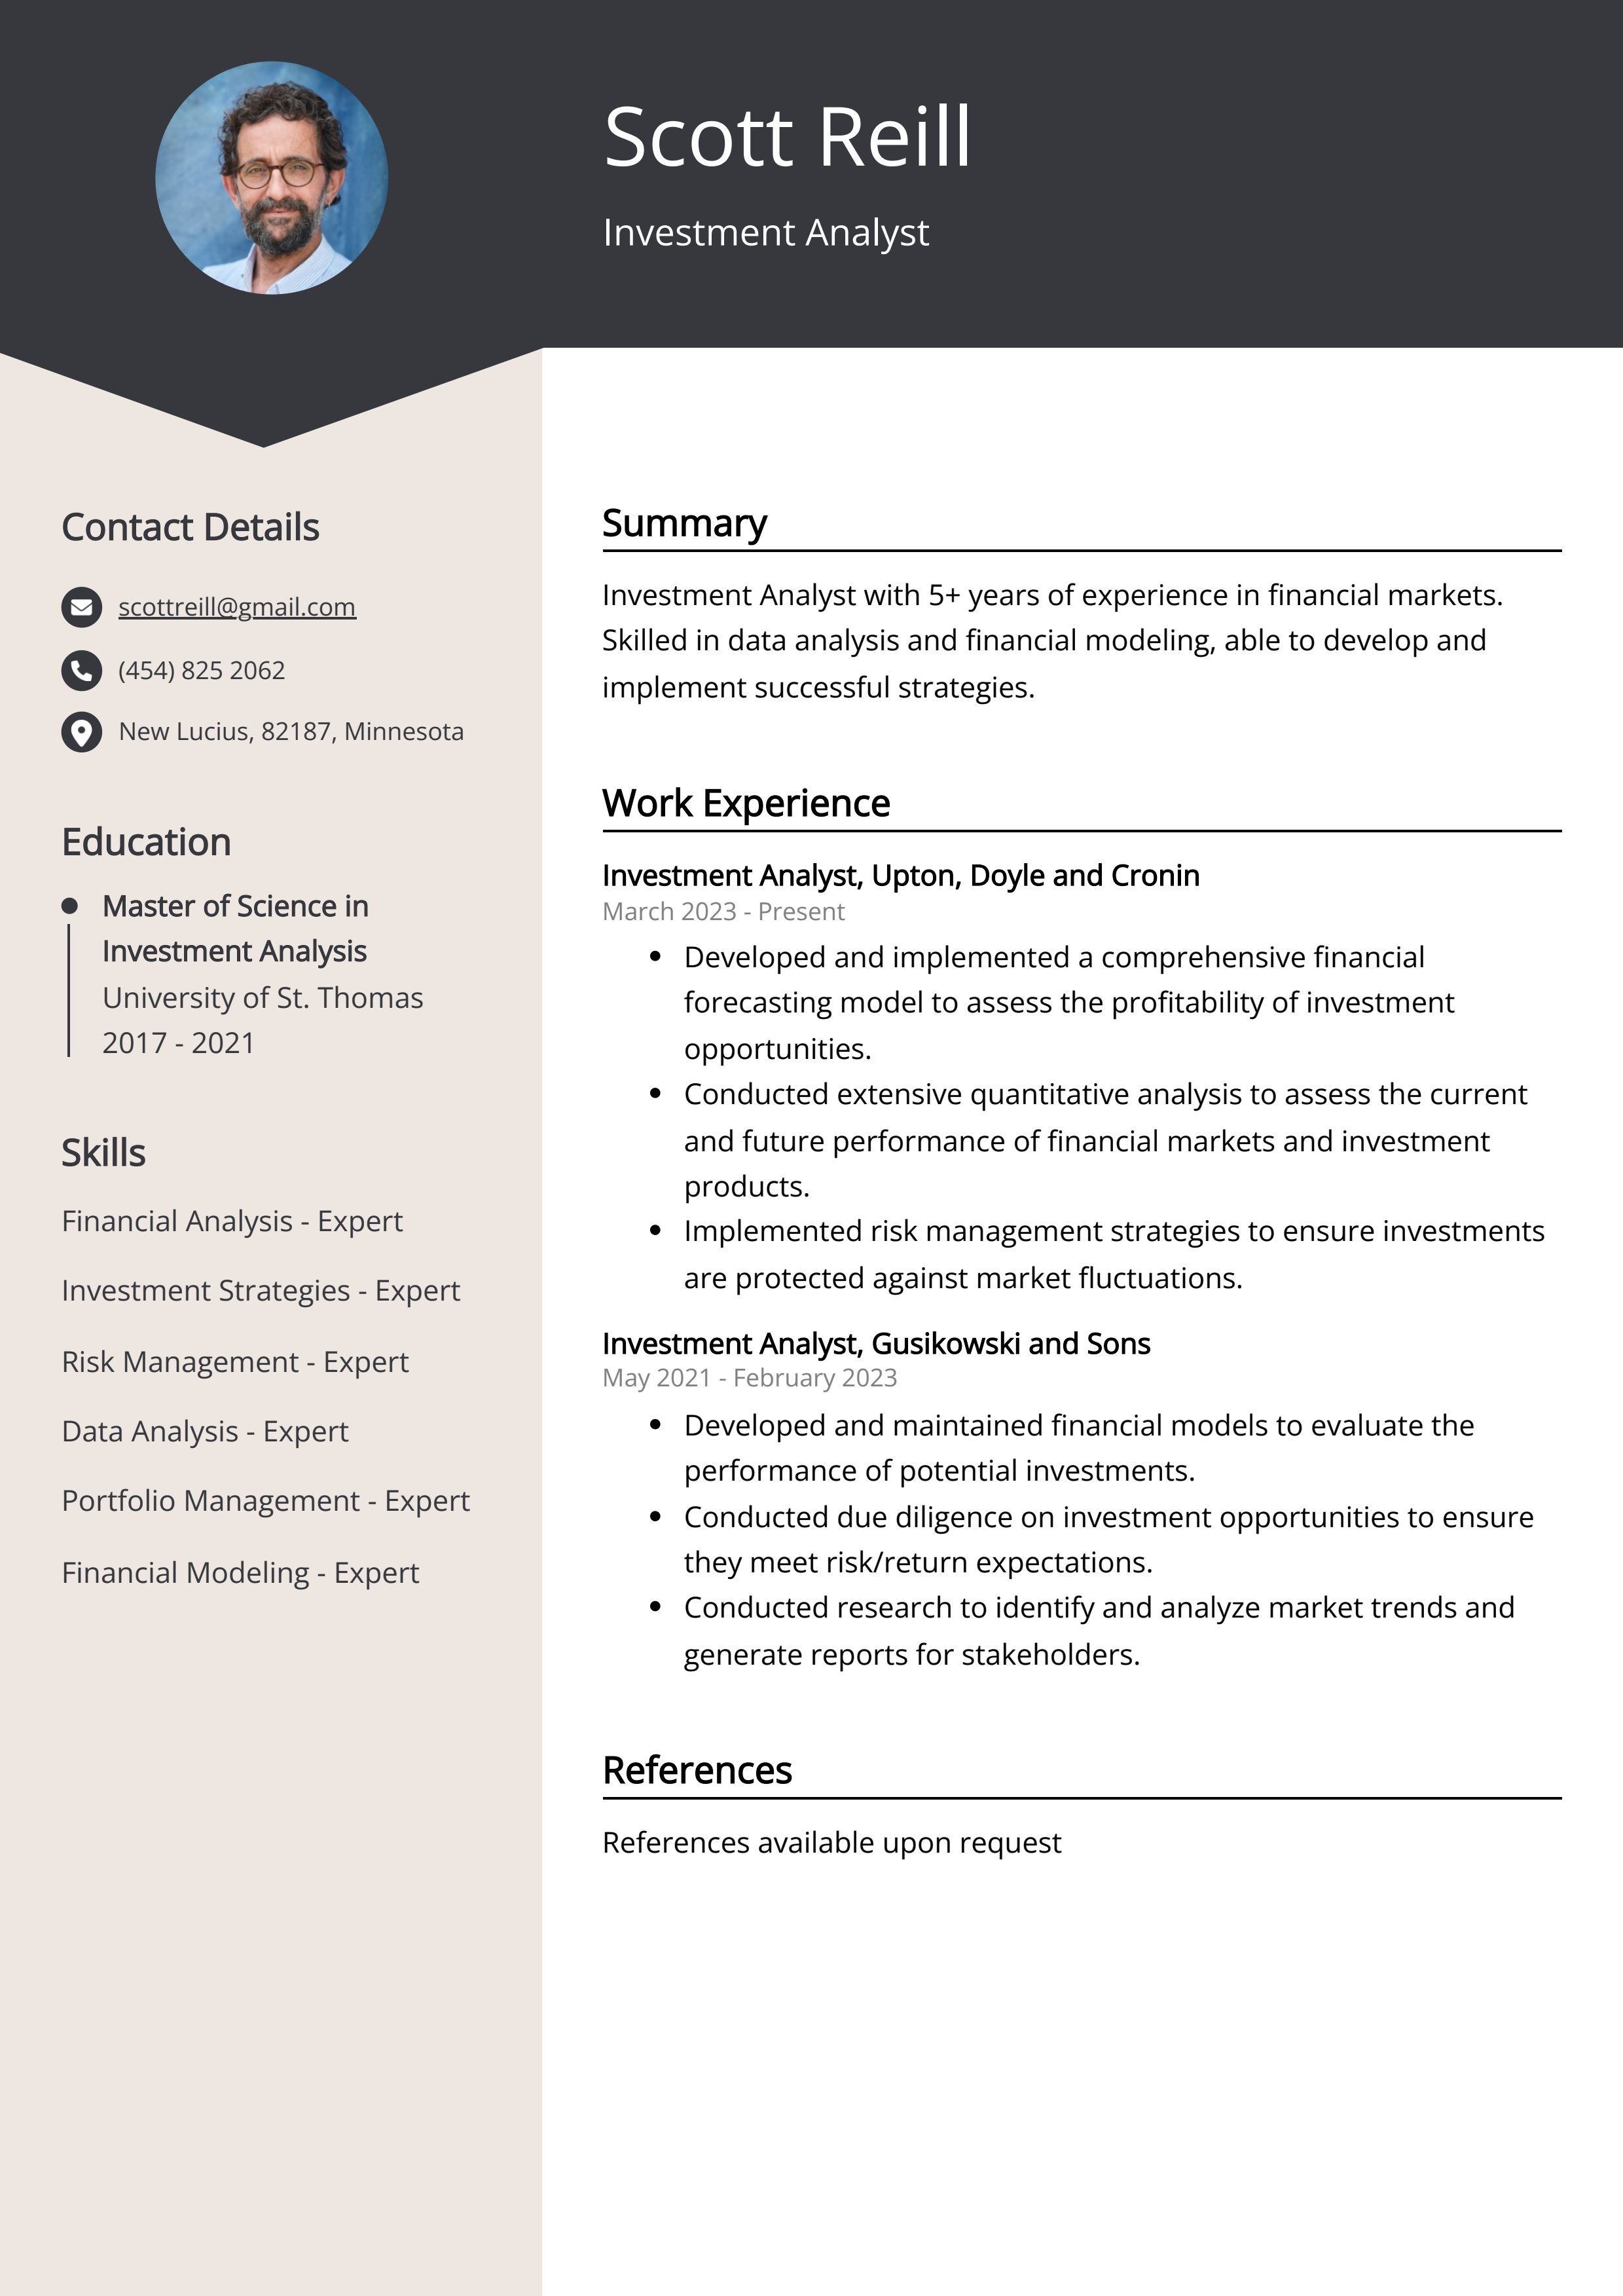 Investment Analyst CV Example